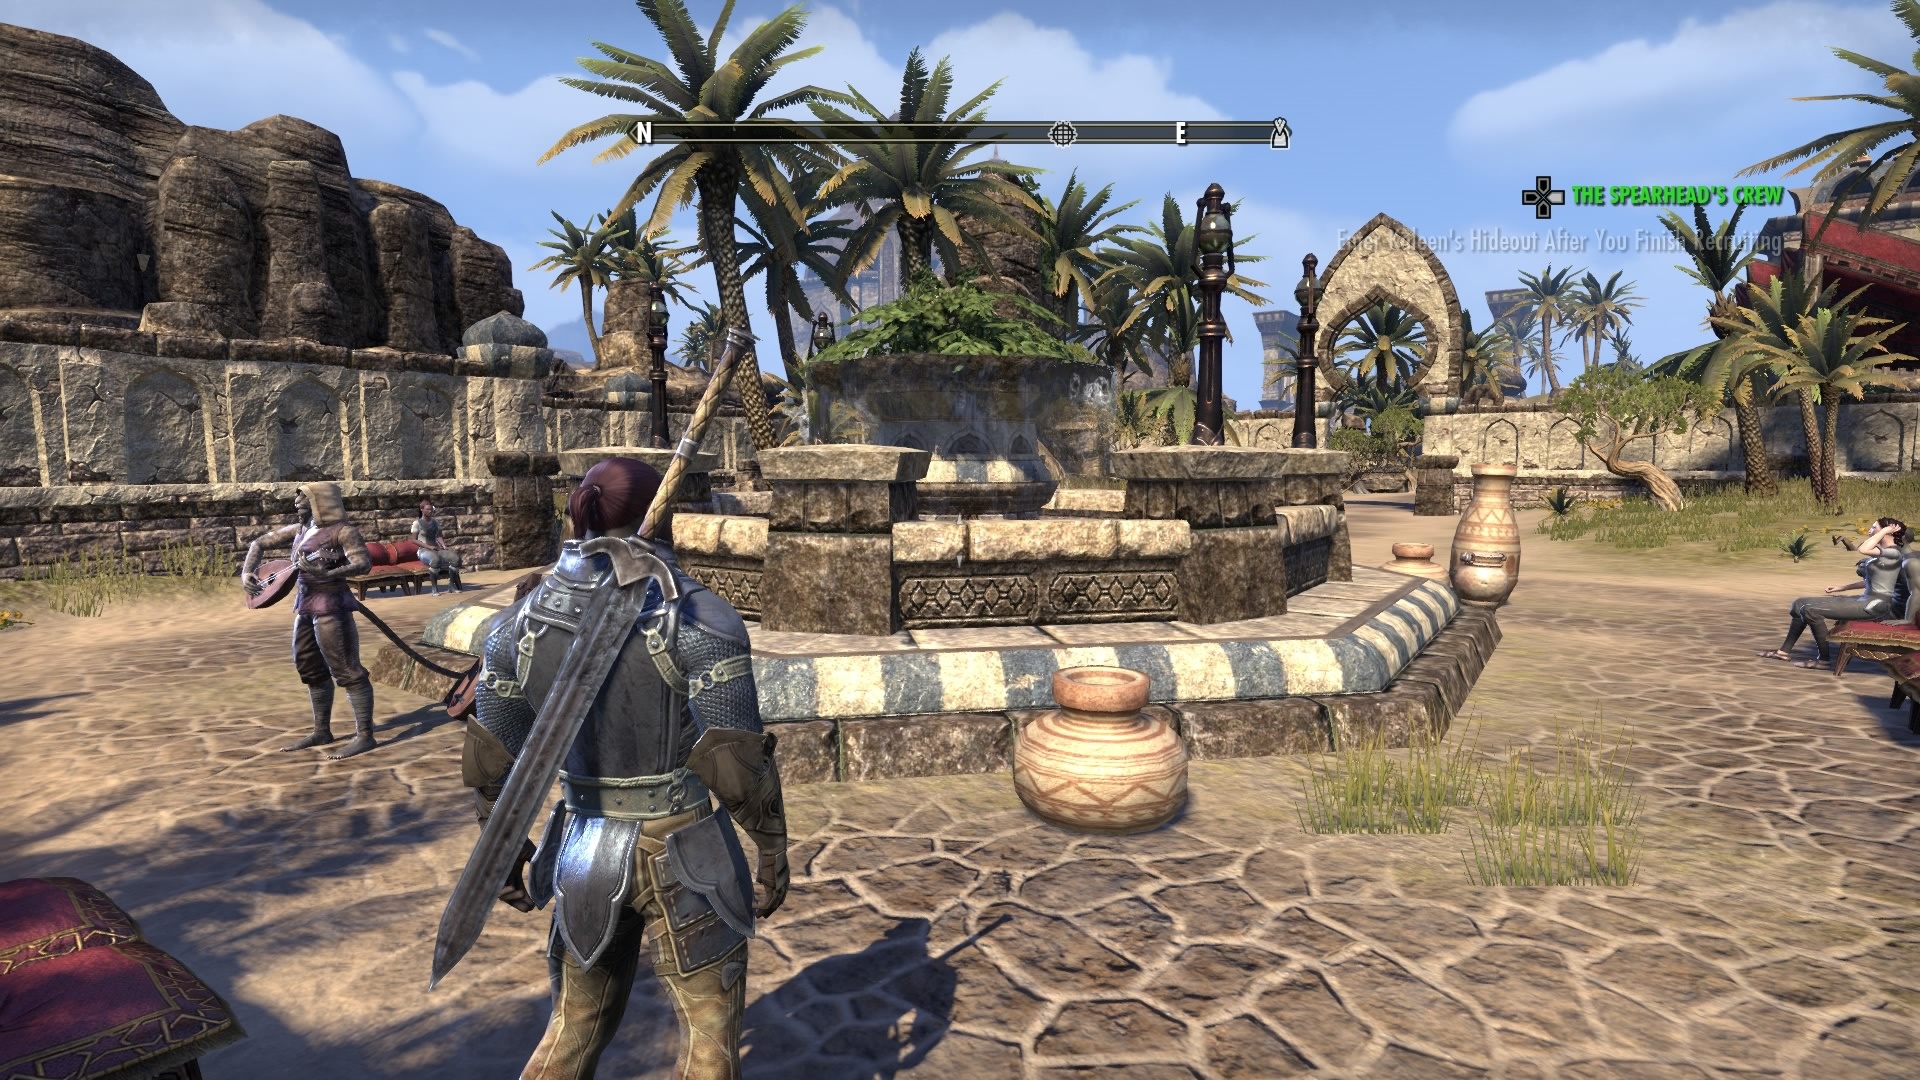 The Elder Scrolls Online Pics, Video Game Collection